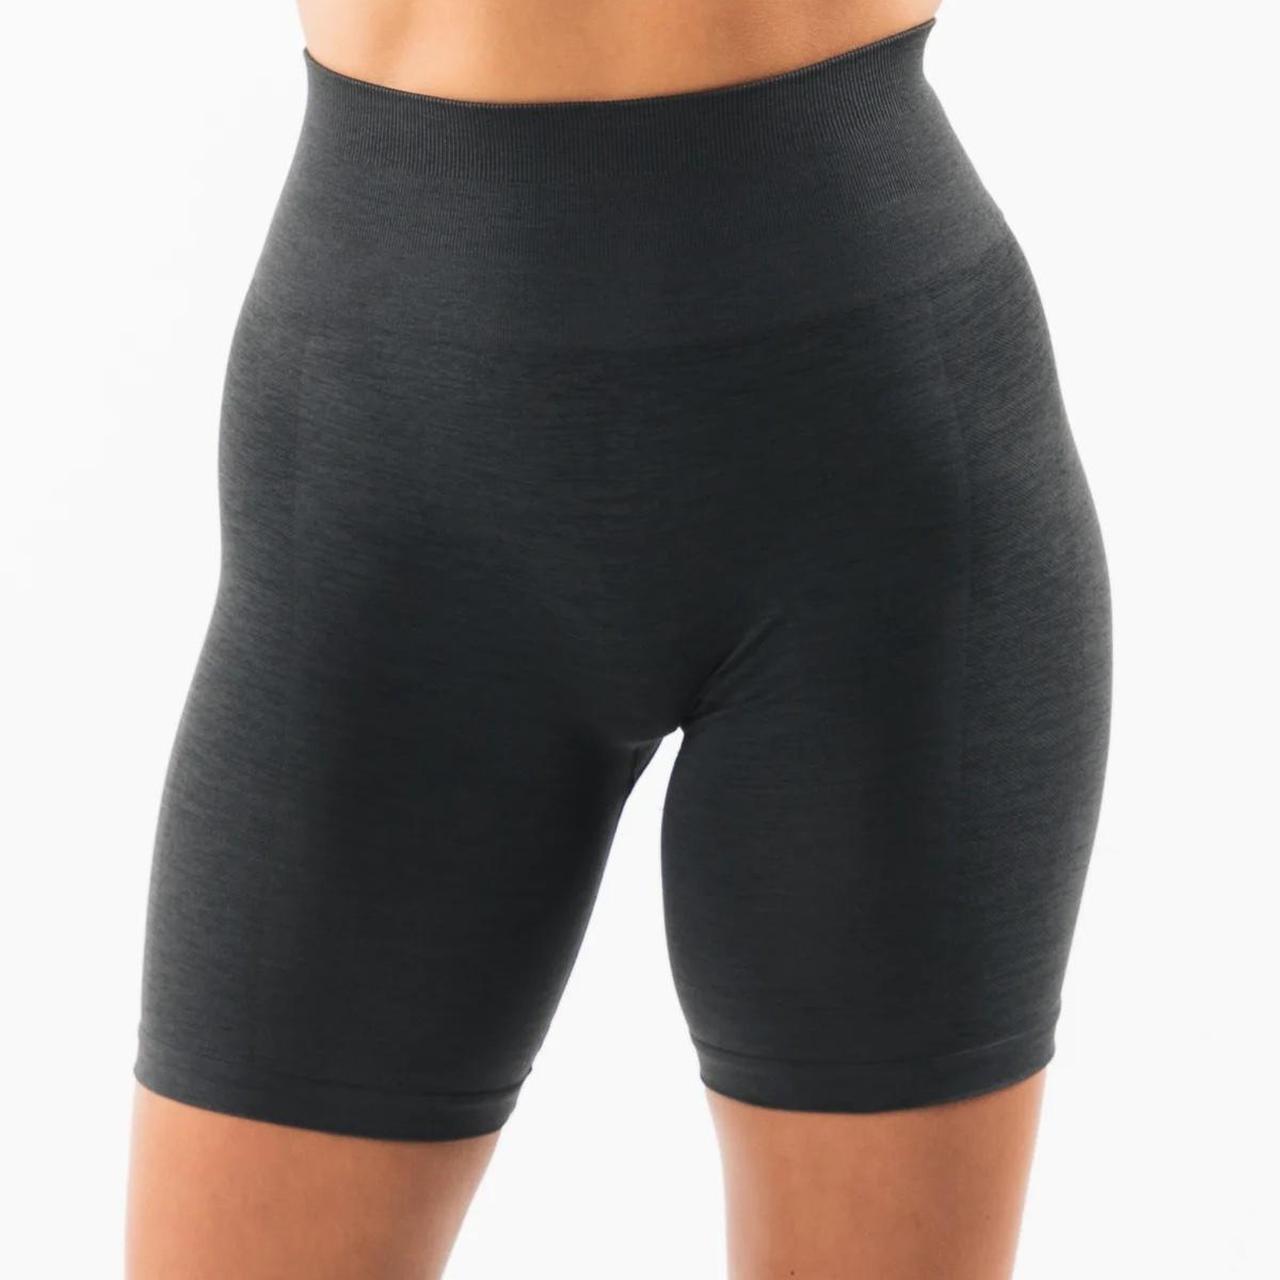 Amplify Short 6.5” - Shadow  High waisted short, Form fitting